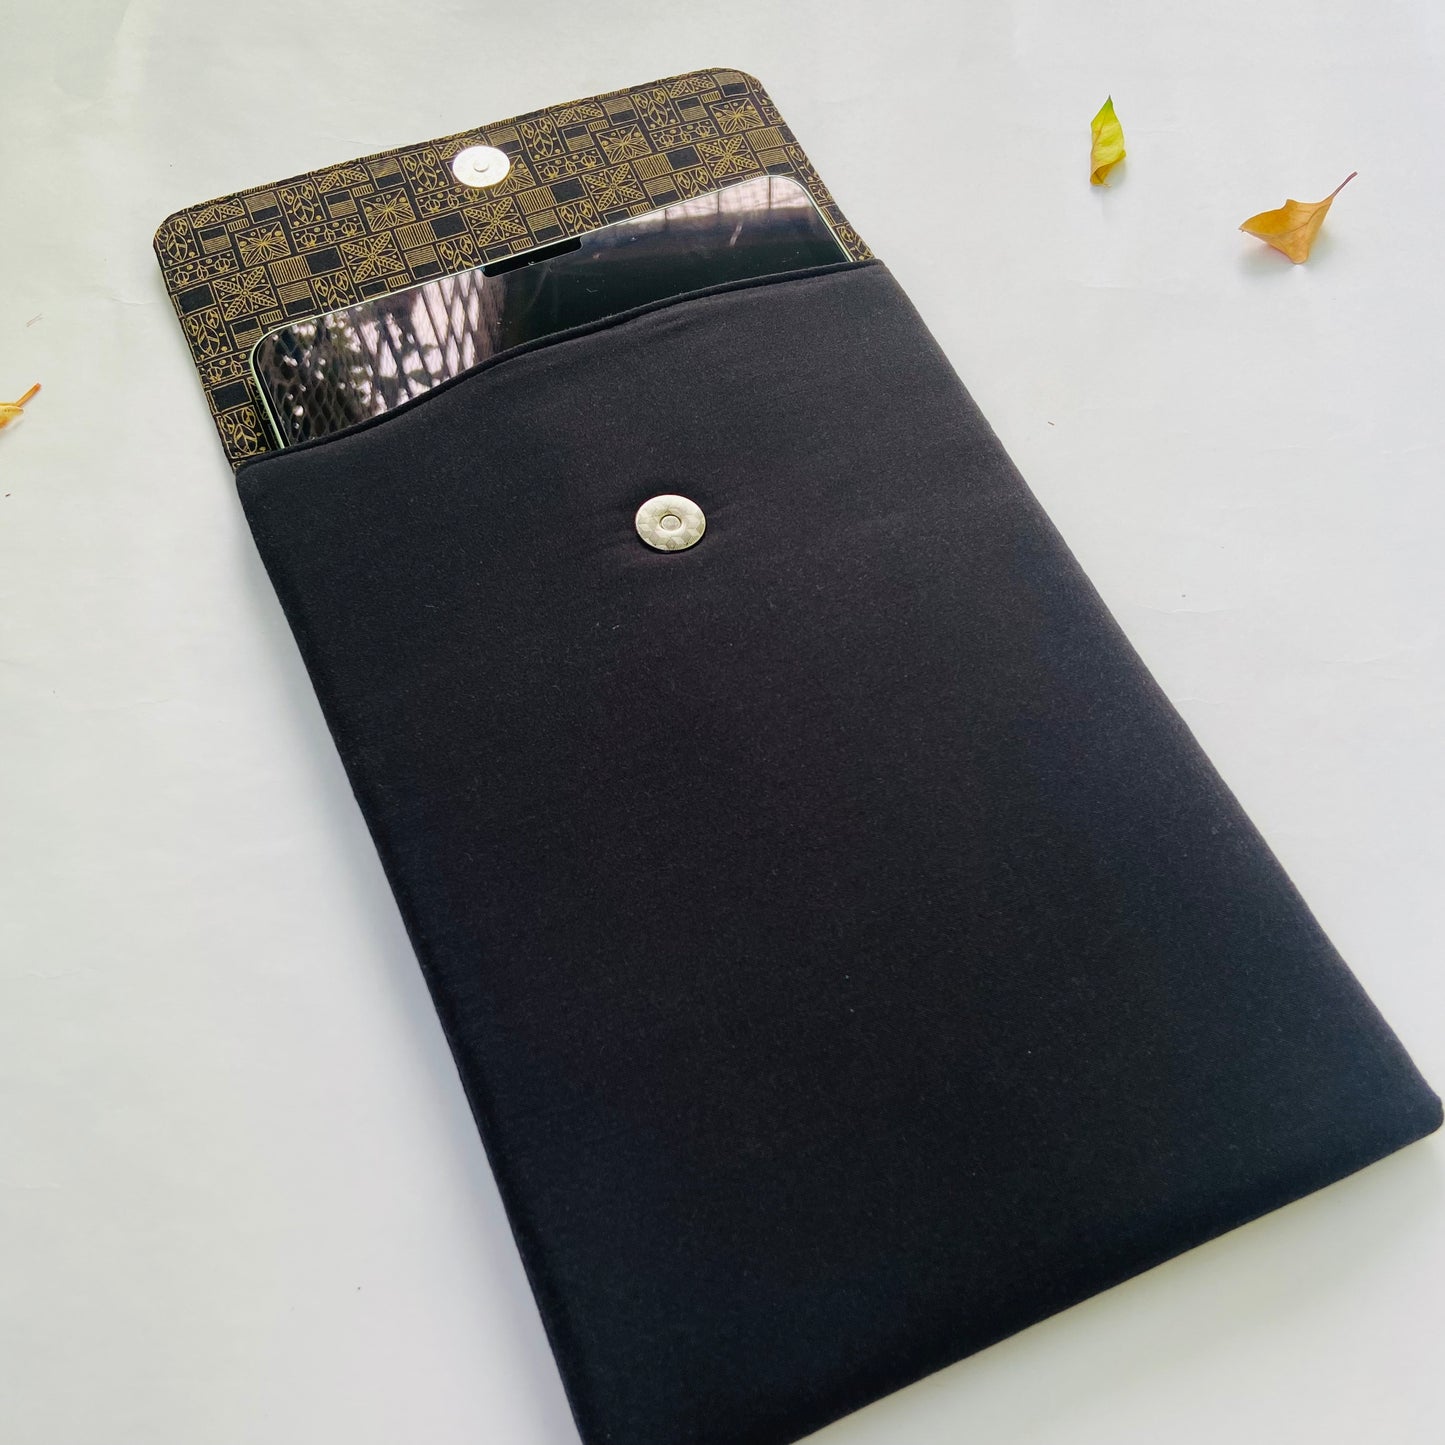 Eco-friendly iPad cover and Tablet Sleeve - Black with Black